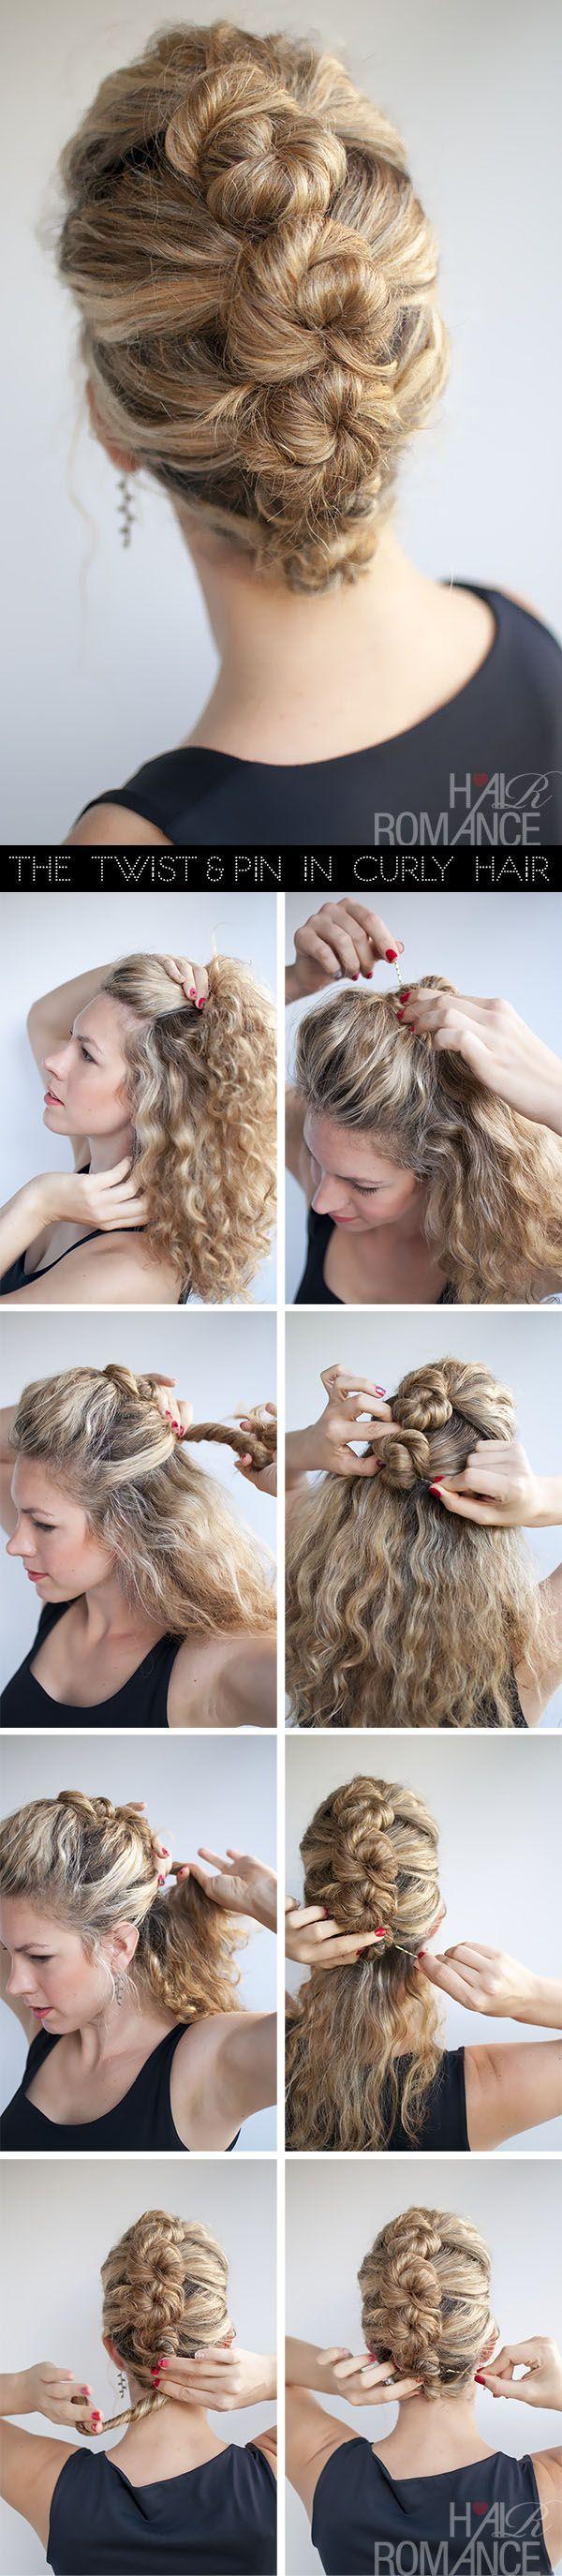 Wedding - Awesome Do It Yourself Hairstyles